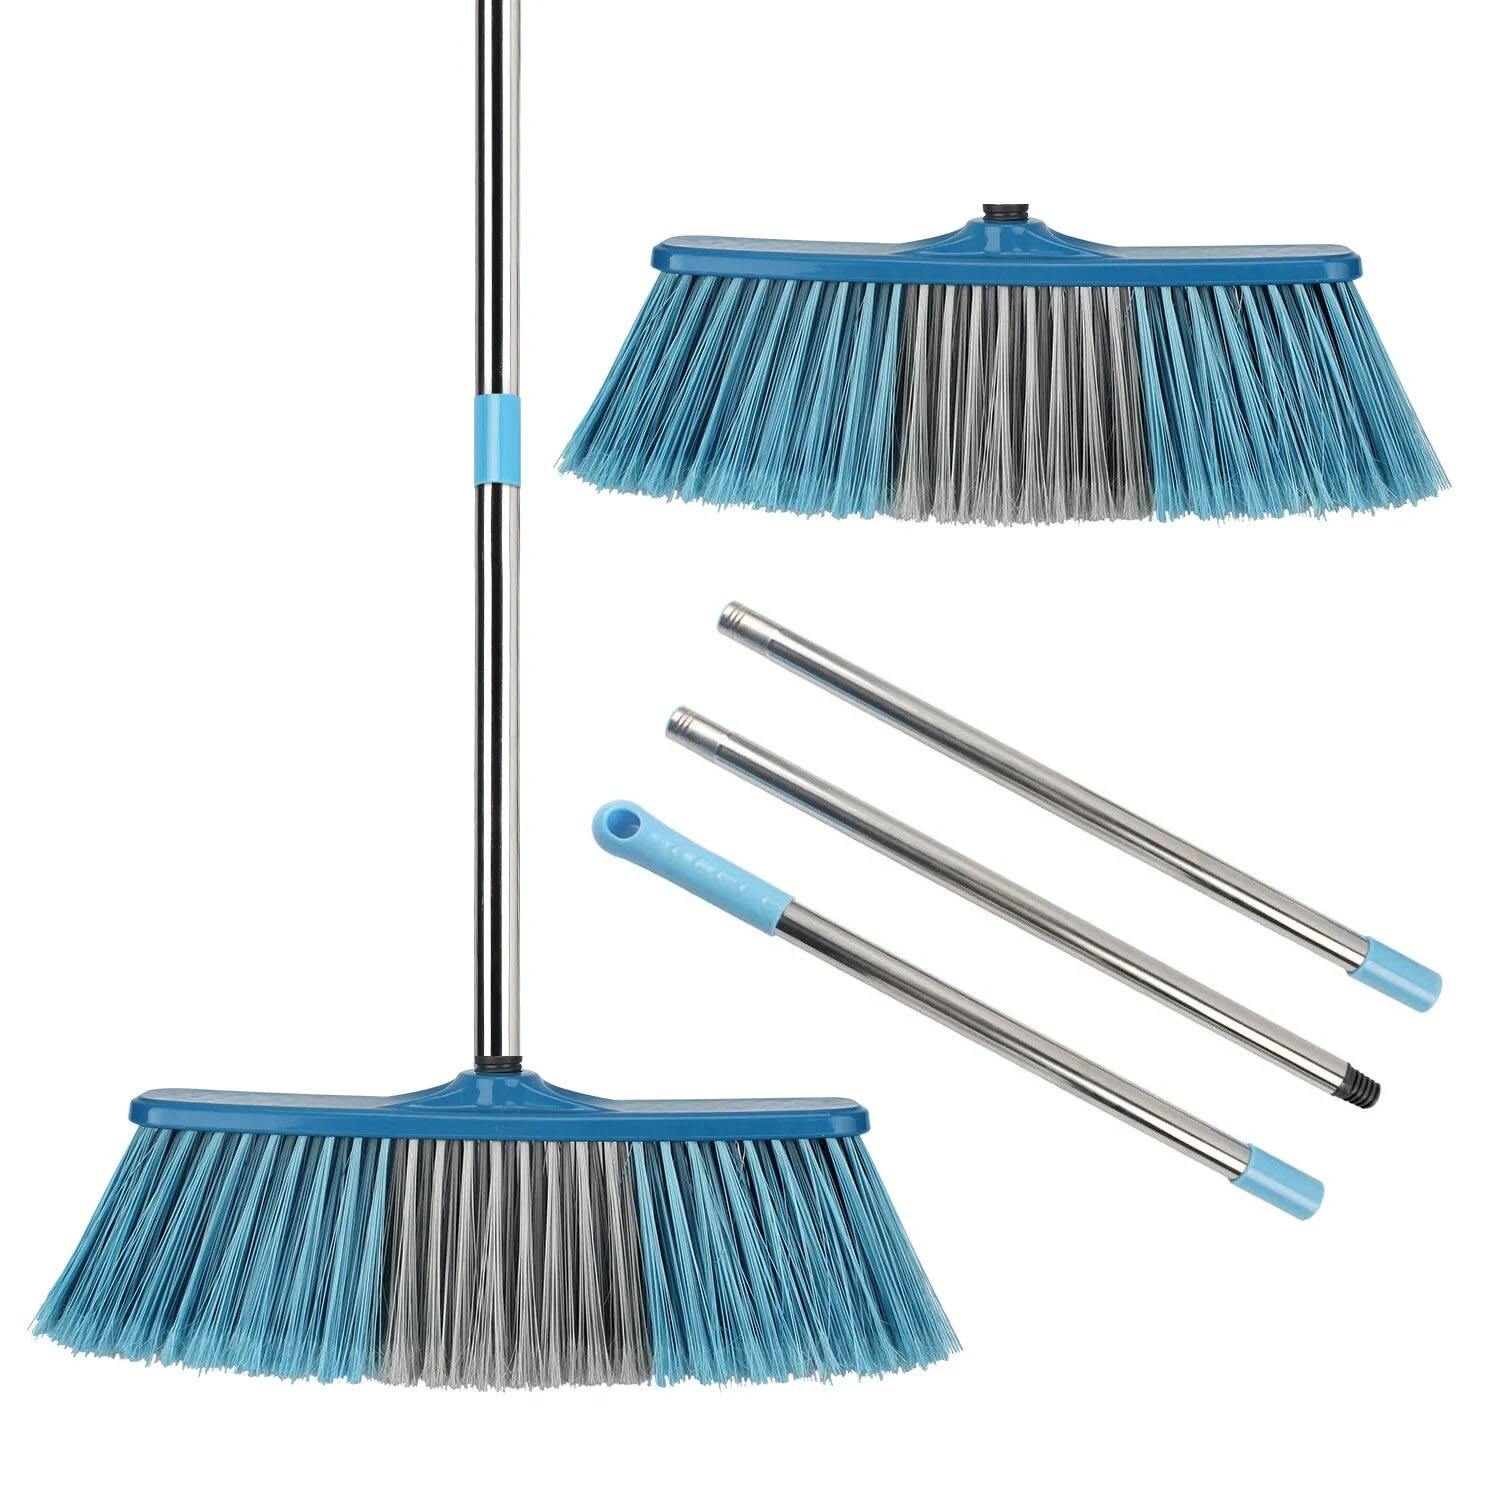 Big Floor Cleaning Broom Adjustable Long Handle Stiff Bristle Grout Brooms Scrubber for Cleaning Outdoor